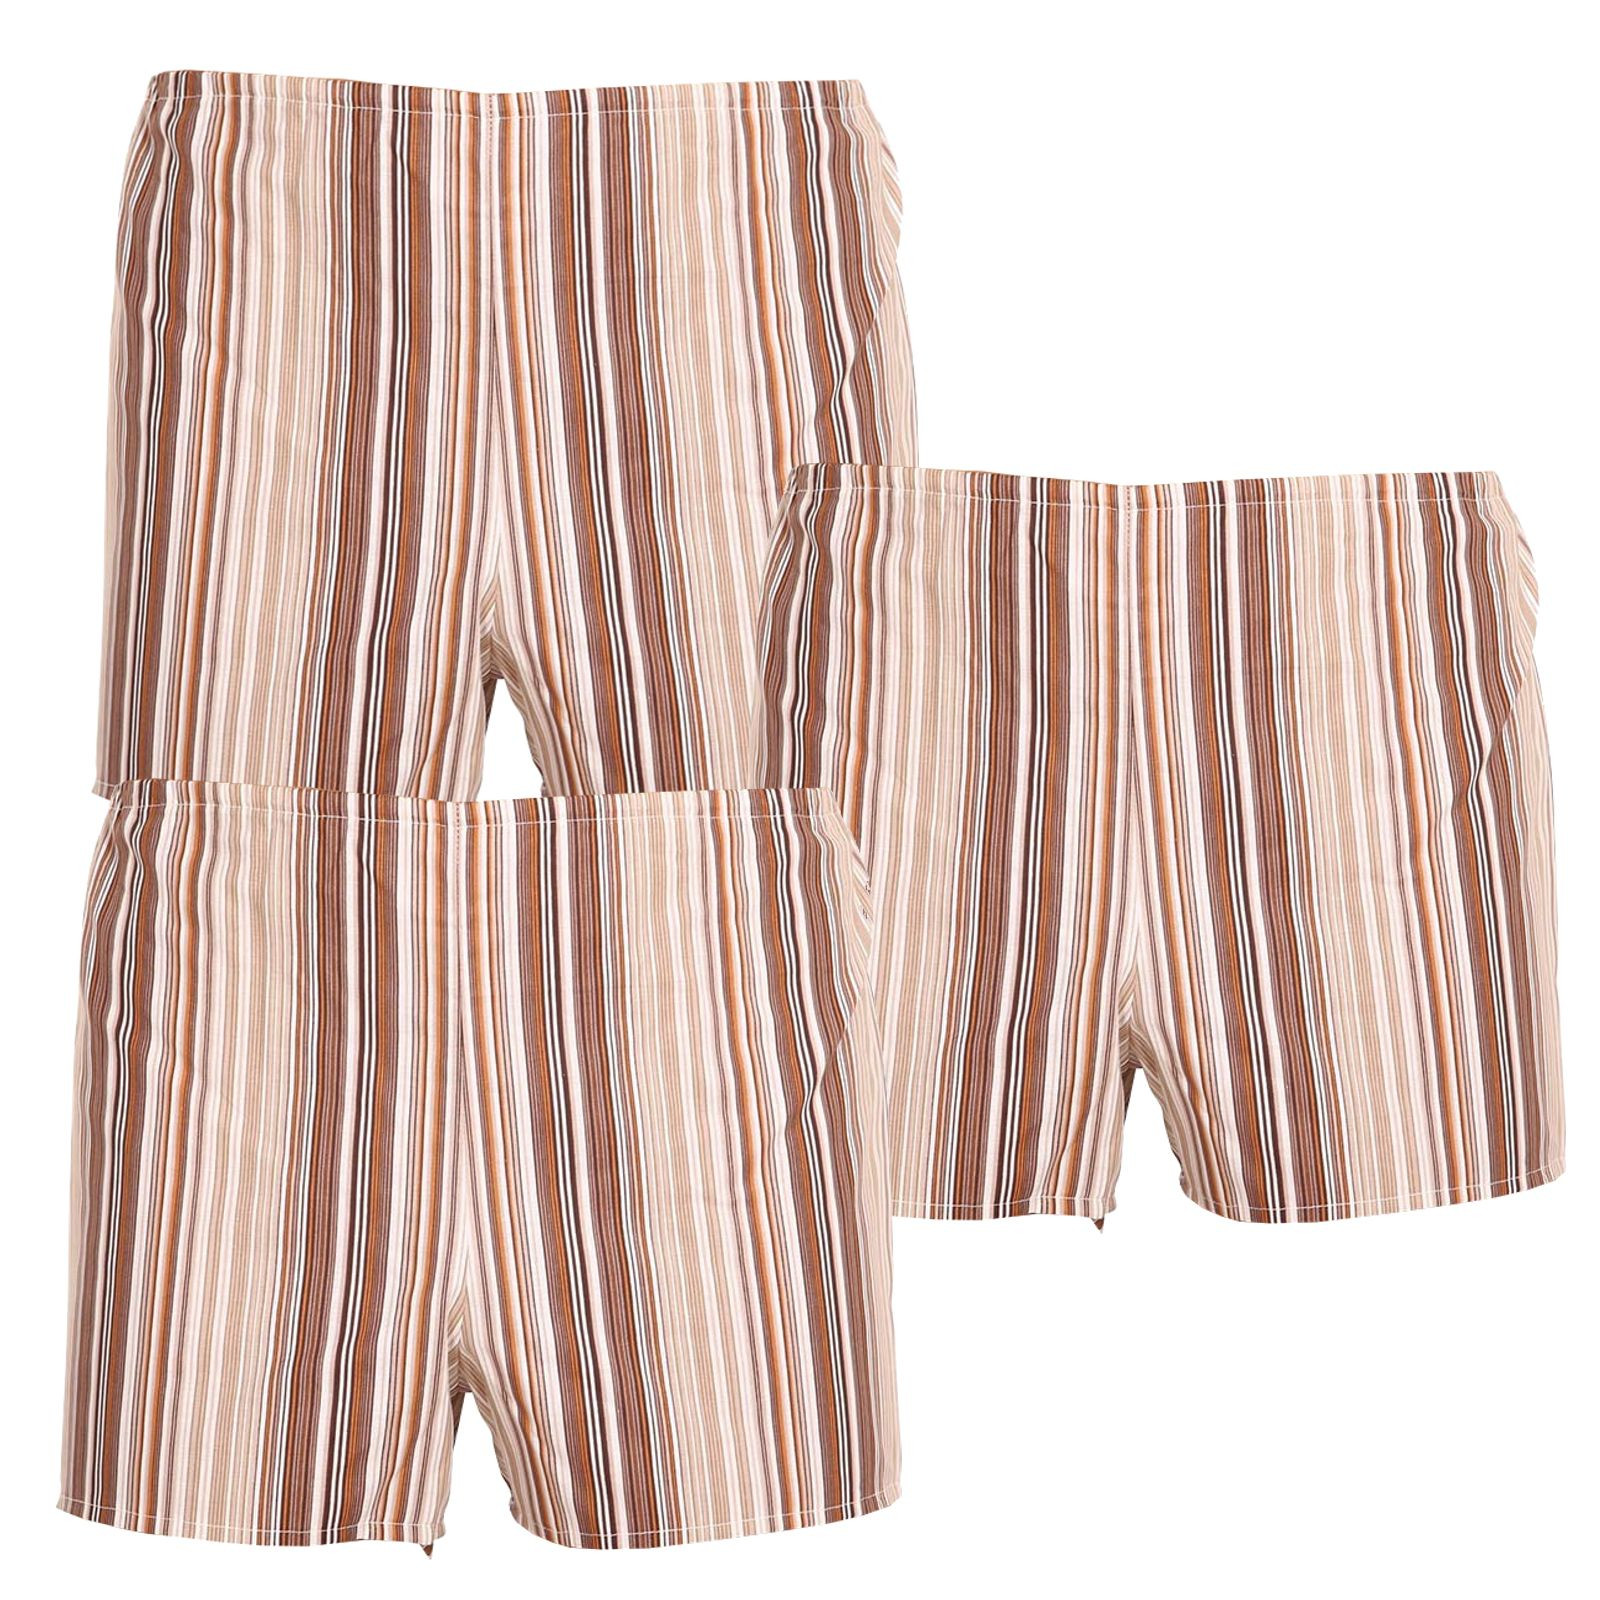 3PACK Men's Classic Shorts Foltýn brown with stripes oversize